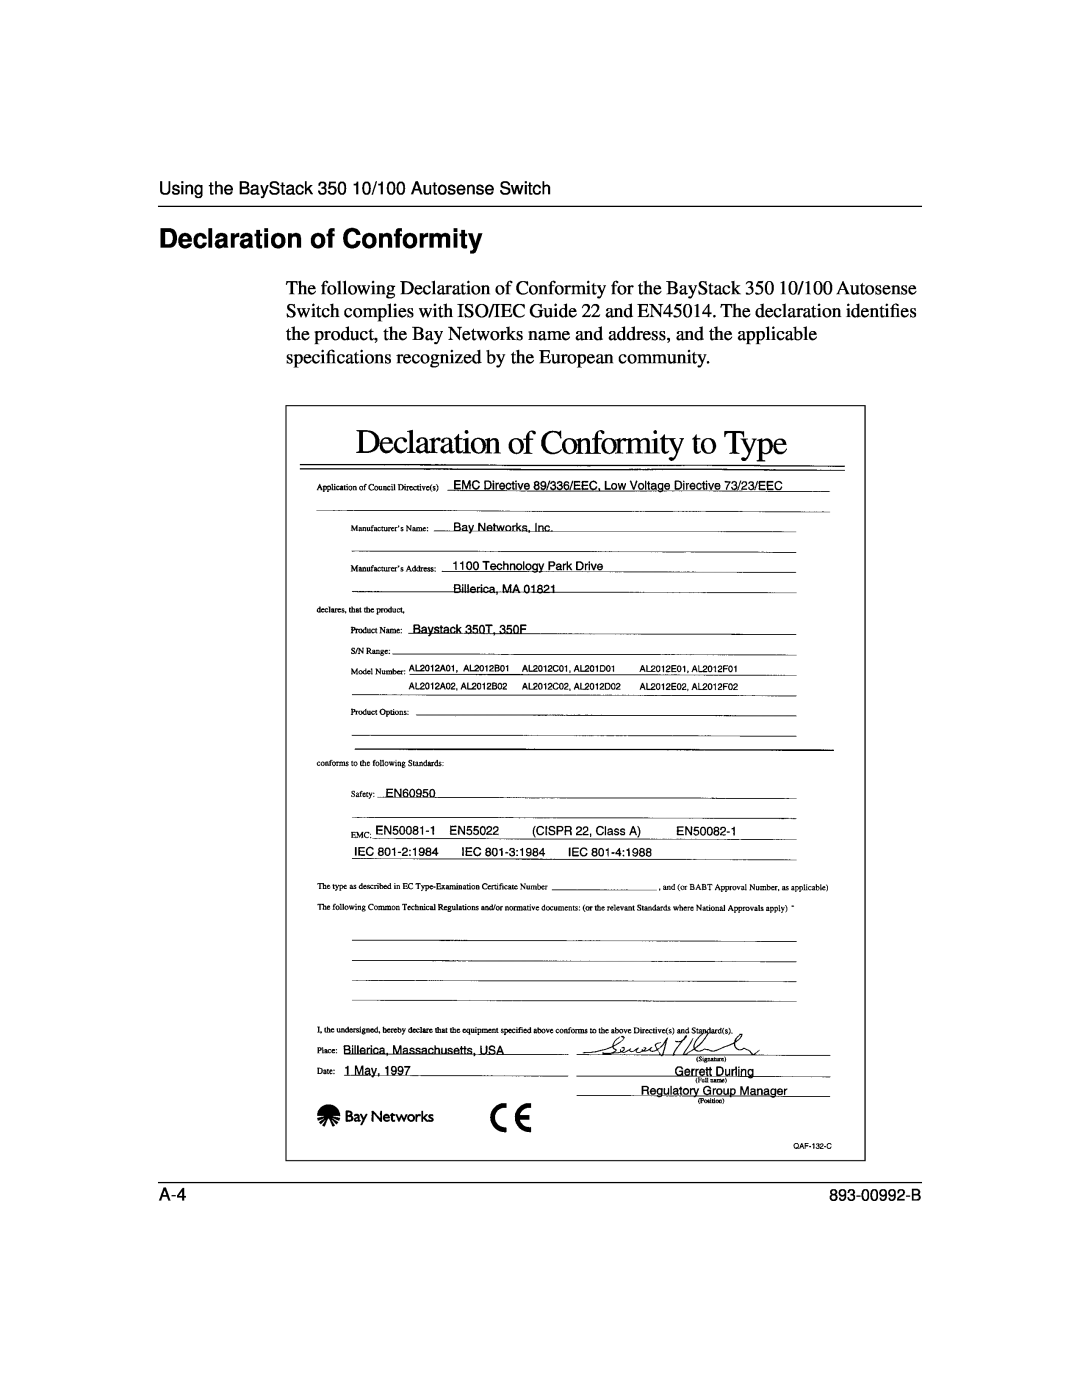 Bay Technical Associates manual Declaration of Conformity, Using the BayStack 350 10/100 Autosense Switch 